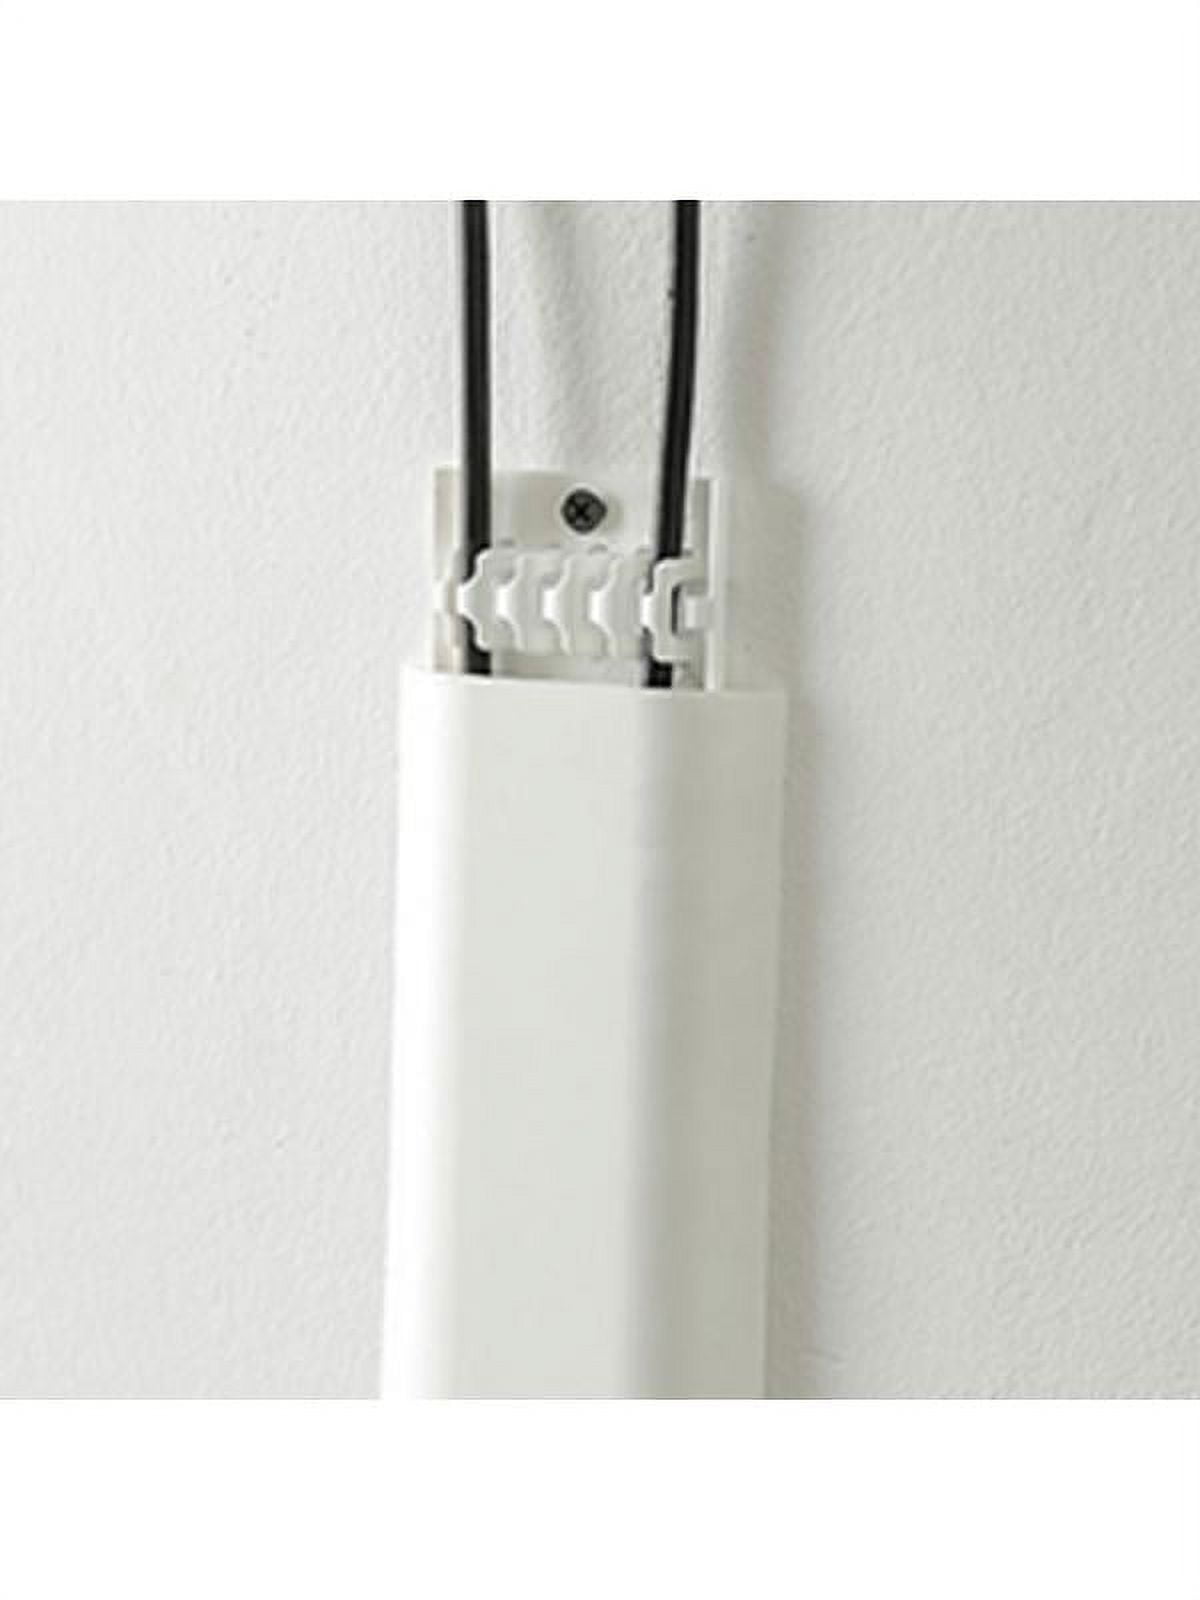 AGPTEK 70 inch Cable Raceway Wall Wire Hider, White Cord Cover Concealer,  Paintable Cover Cable Raceway Channel for Hide Mounted TV &Wall Cords,  Cables, or Wires – 6X 11.6 （L） 3.3″ (W) x 0.59″ (H)